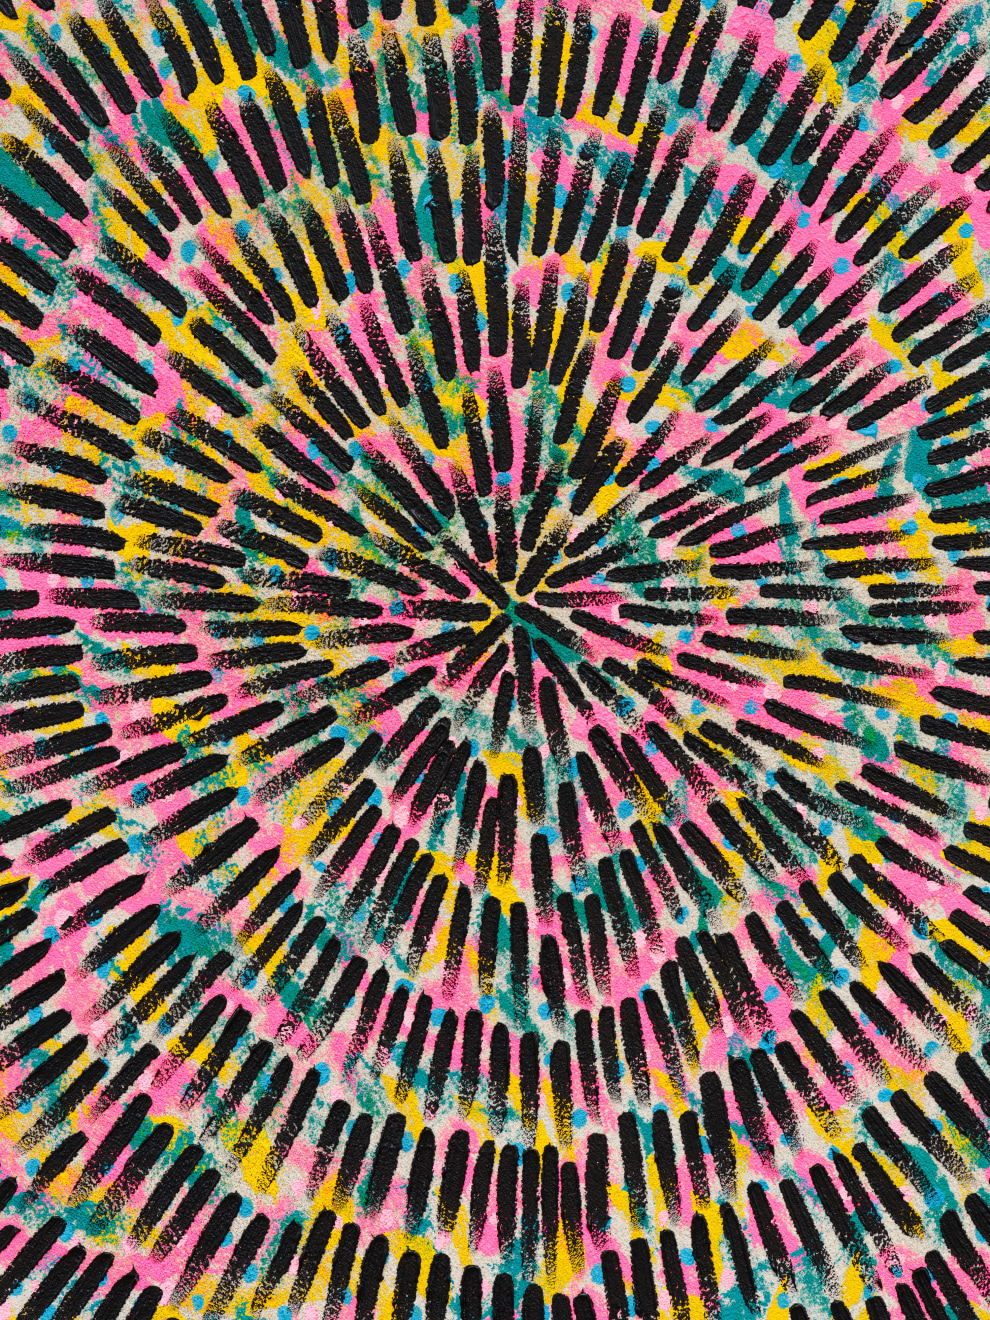 Jennifer Guidi, Waves of Color (Painted Universe Mandala, Black, White Sand, Yellow, Pink, Light Pink and Blue, Natural Ground), 2022